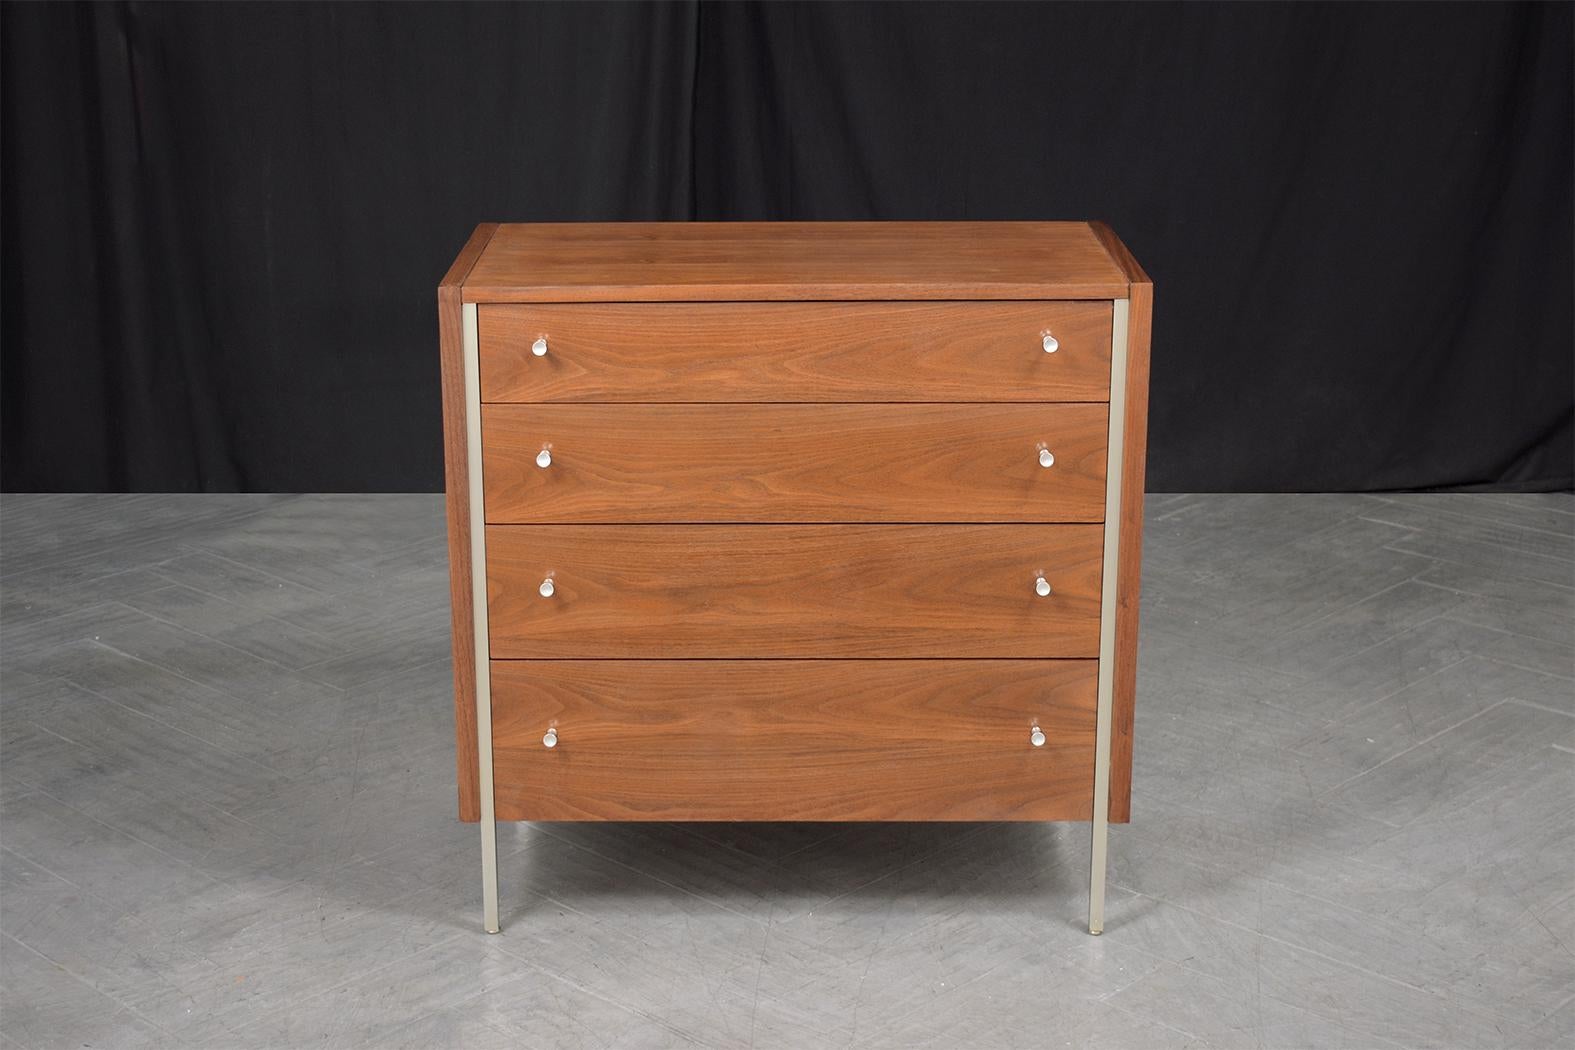 Experience mid-century sophistication with our handcrafted walnut chest of drawers. Expertly restored by our dedicated craftsmen, this premium dresser stands out in any room. Admire the rich grain of the walnut wood, highlighted by a natural stain